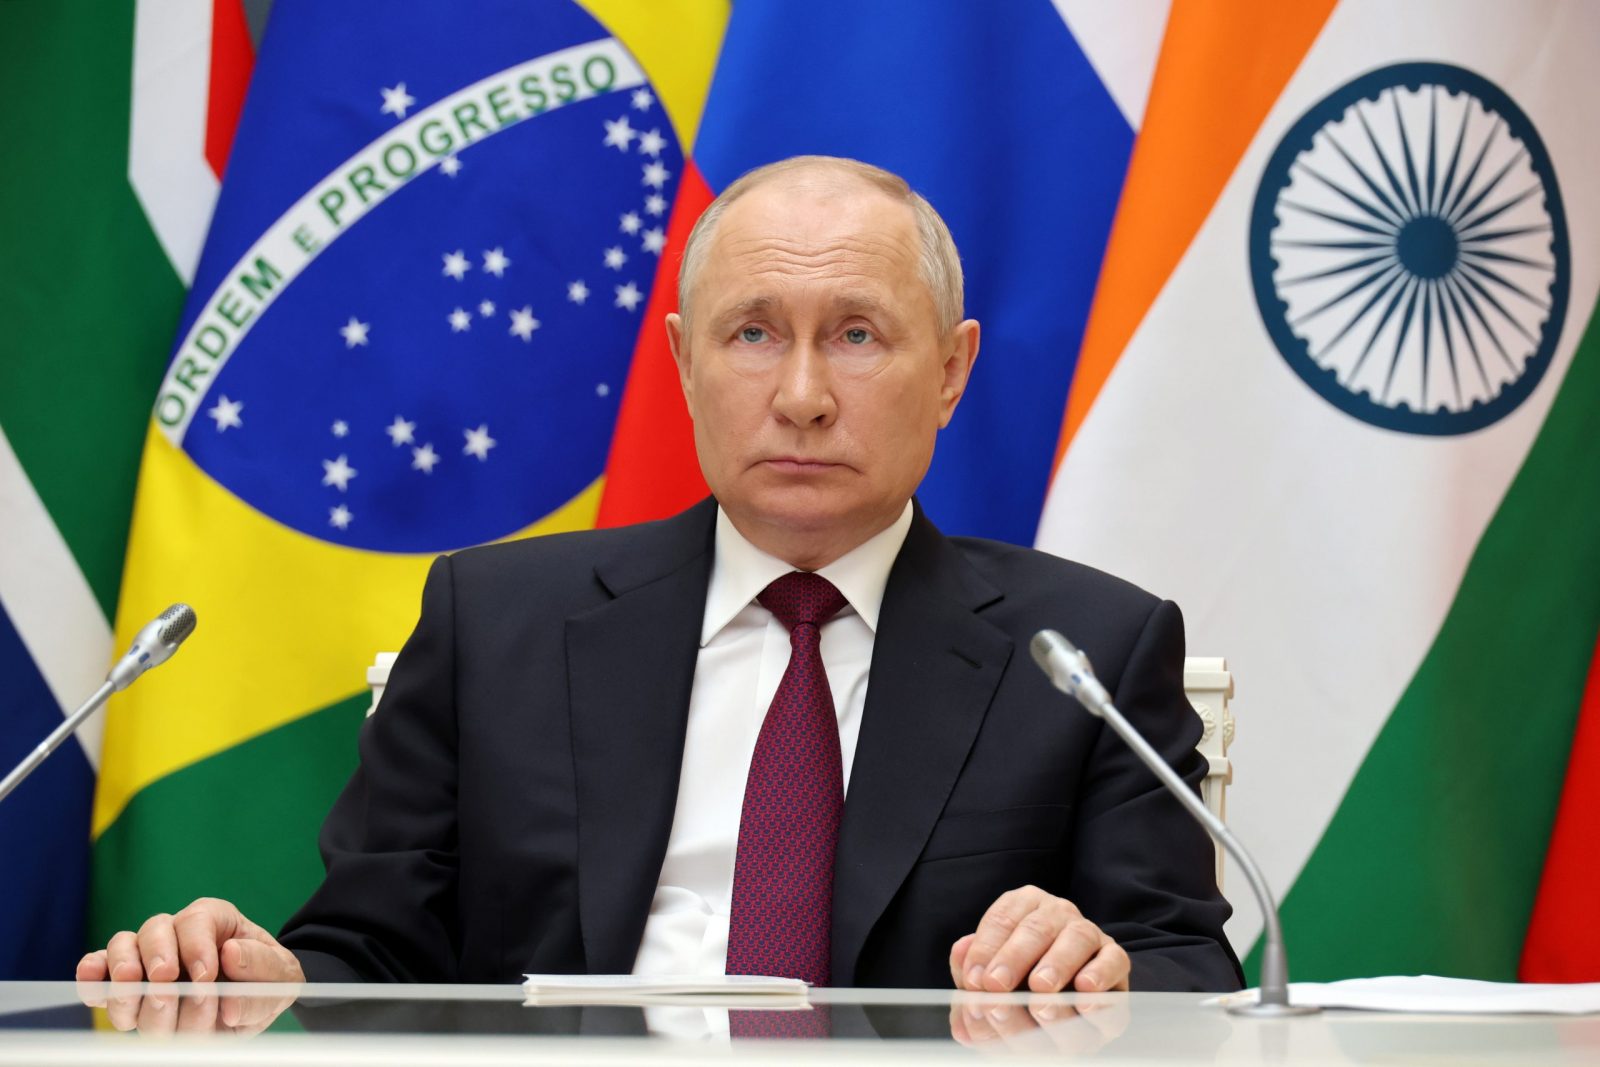 epa10815532 Russian President Vladimir Putin attends the 15th BRICS Summit via video link in Moscow, Russia, 22 August 2023 (Issued on 23 August 2023). South Africa is hosting the 15th BRICS Summit, (Brazil, Russia, India, China and South Africa), as the group's economies account for a quarter of global gross domestic product. Dozens of leaders of other countries in Africa, Asia and the Middle East are also attending the summit.  EPA/MIKHAEL KLIMENTYEV / SPUTNIK / KREMLIN POOL